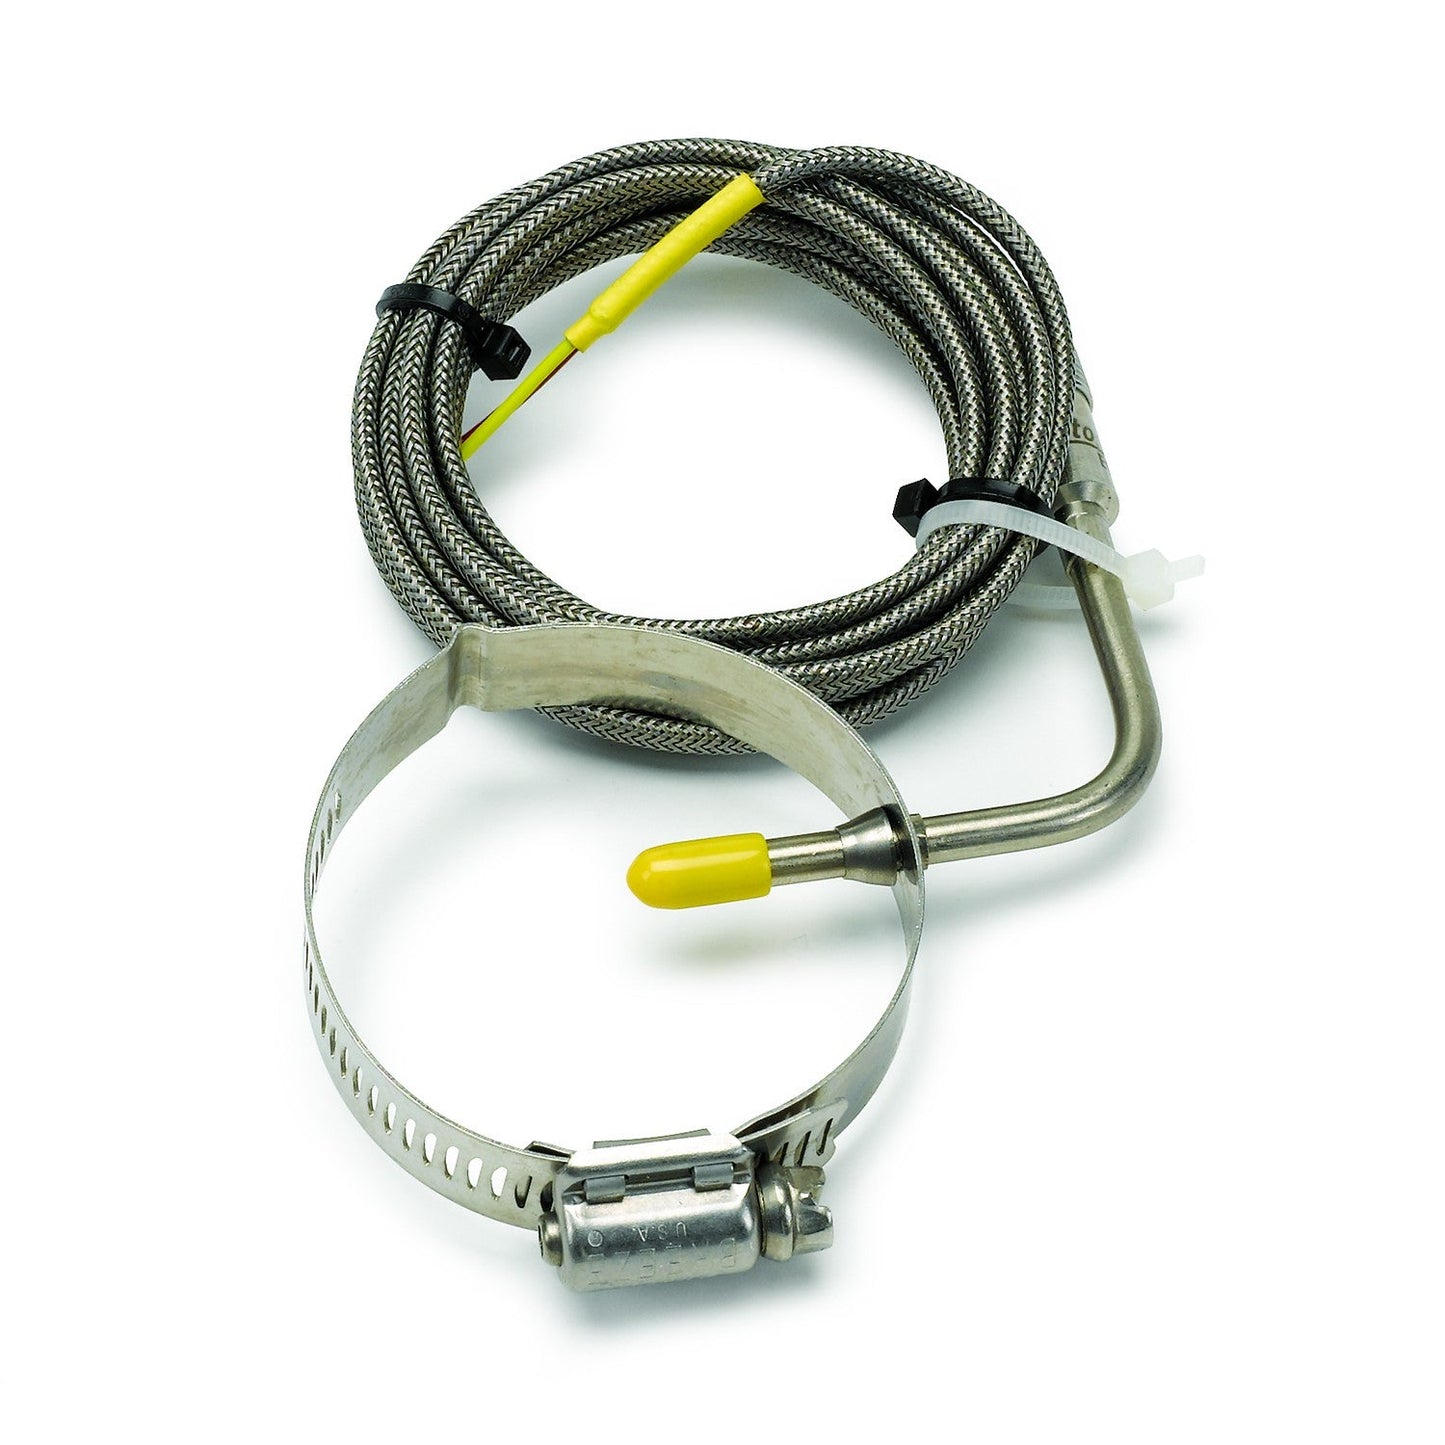 AutoMeter - THERMOCOUPLE KIT, TYPE K, 3/16" DIA, CLOSED TIP, 10 FT., INCL. STAINLESS BAND CLAMP (5247)